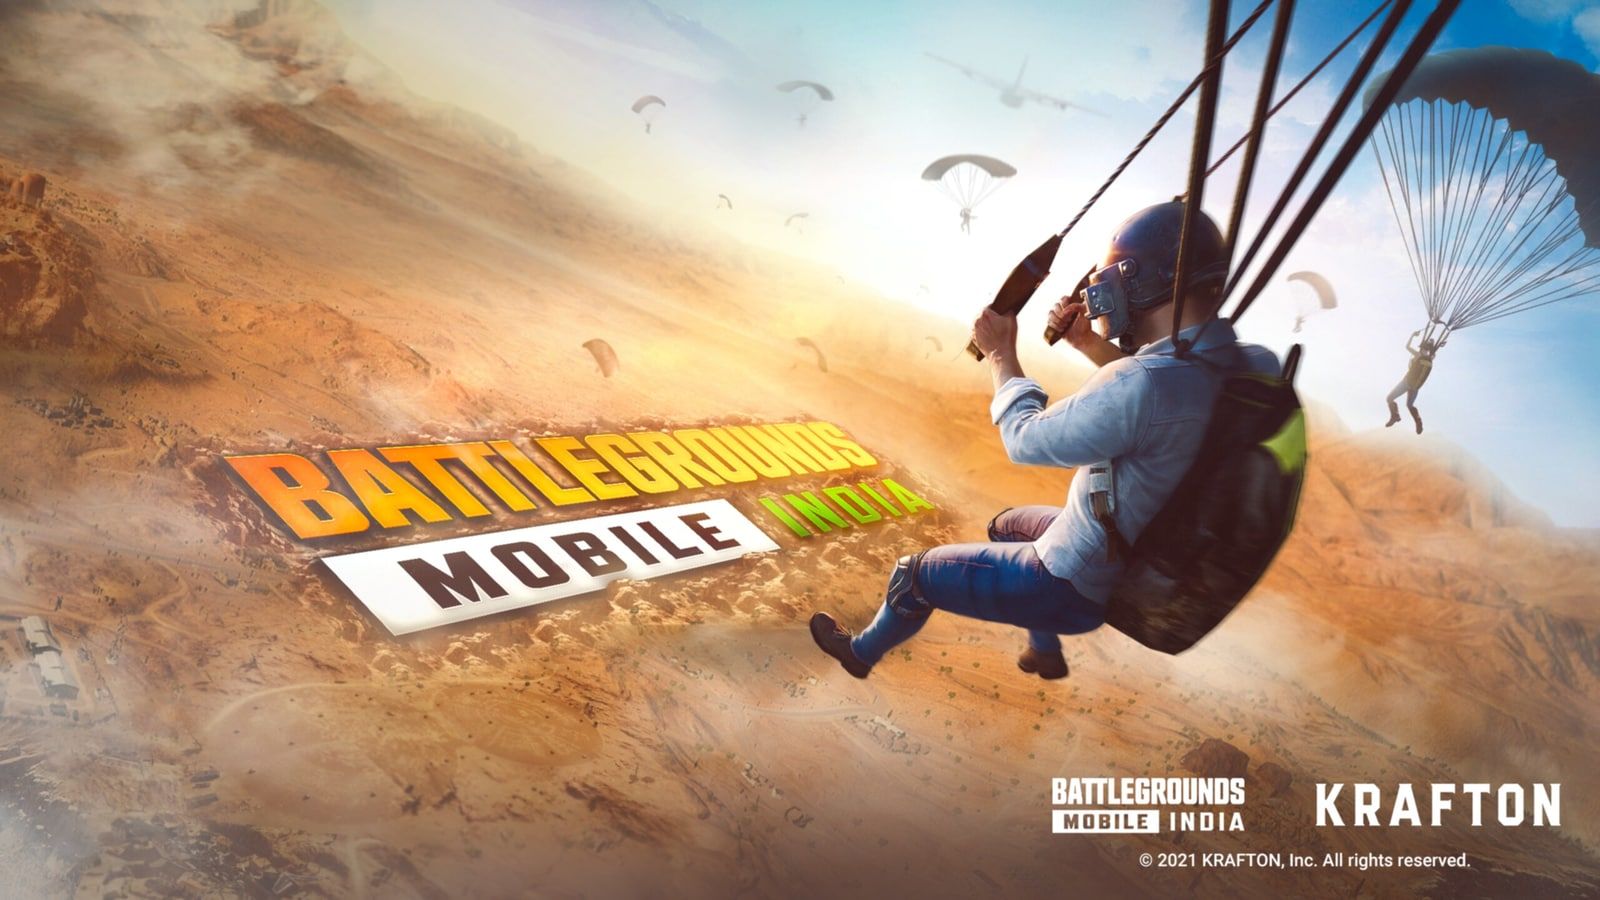 PUBG Mobile India to launch as 'Battlegrounds Mobile India'